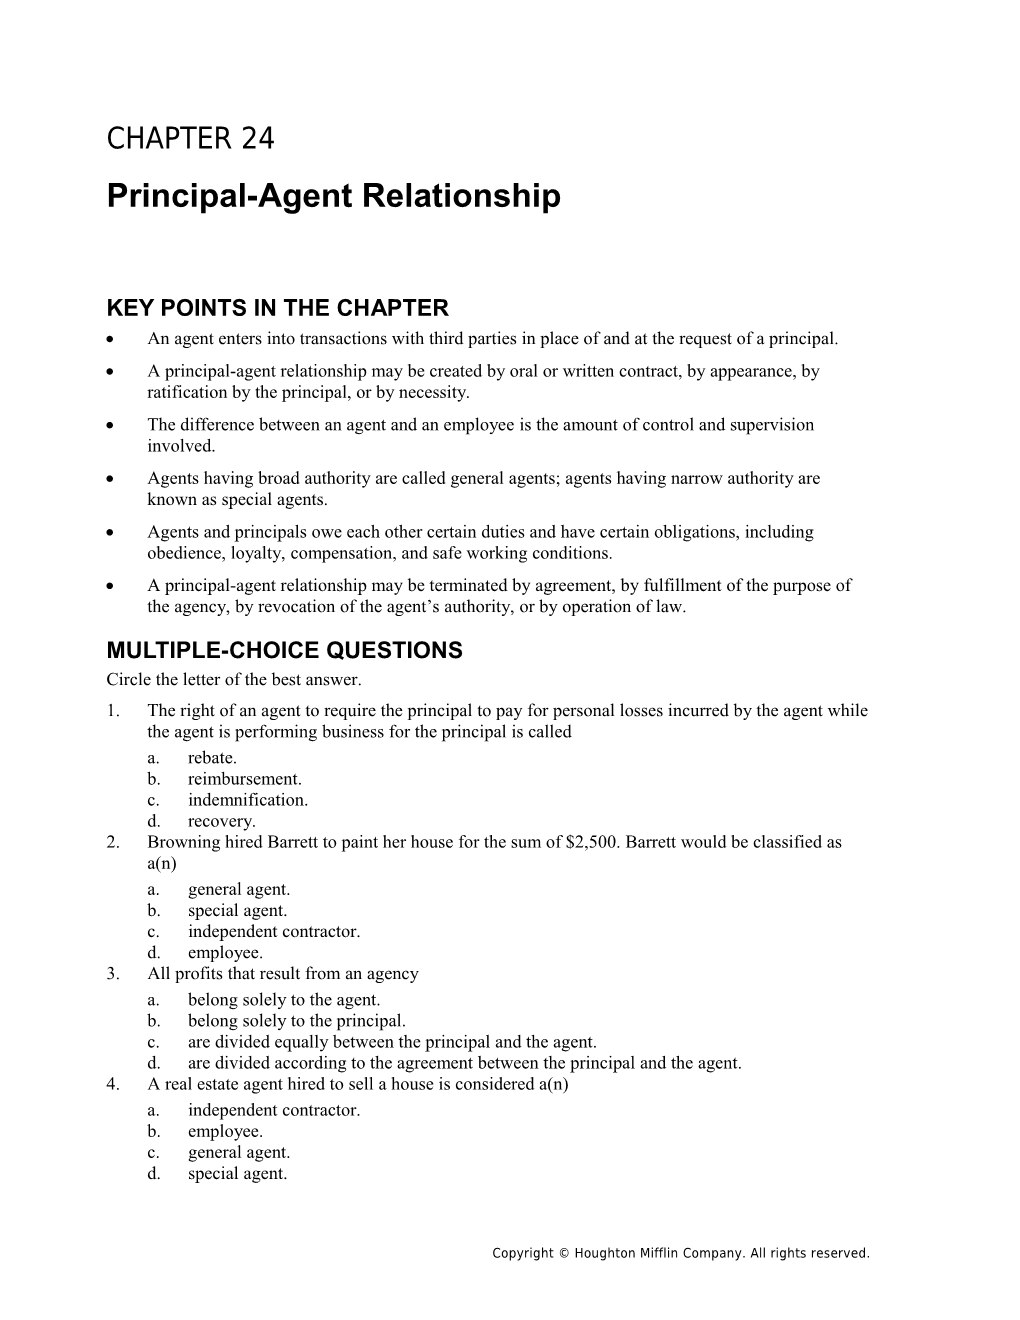 Chapter 24: Principal-Agent Relationship 1